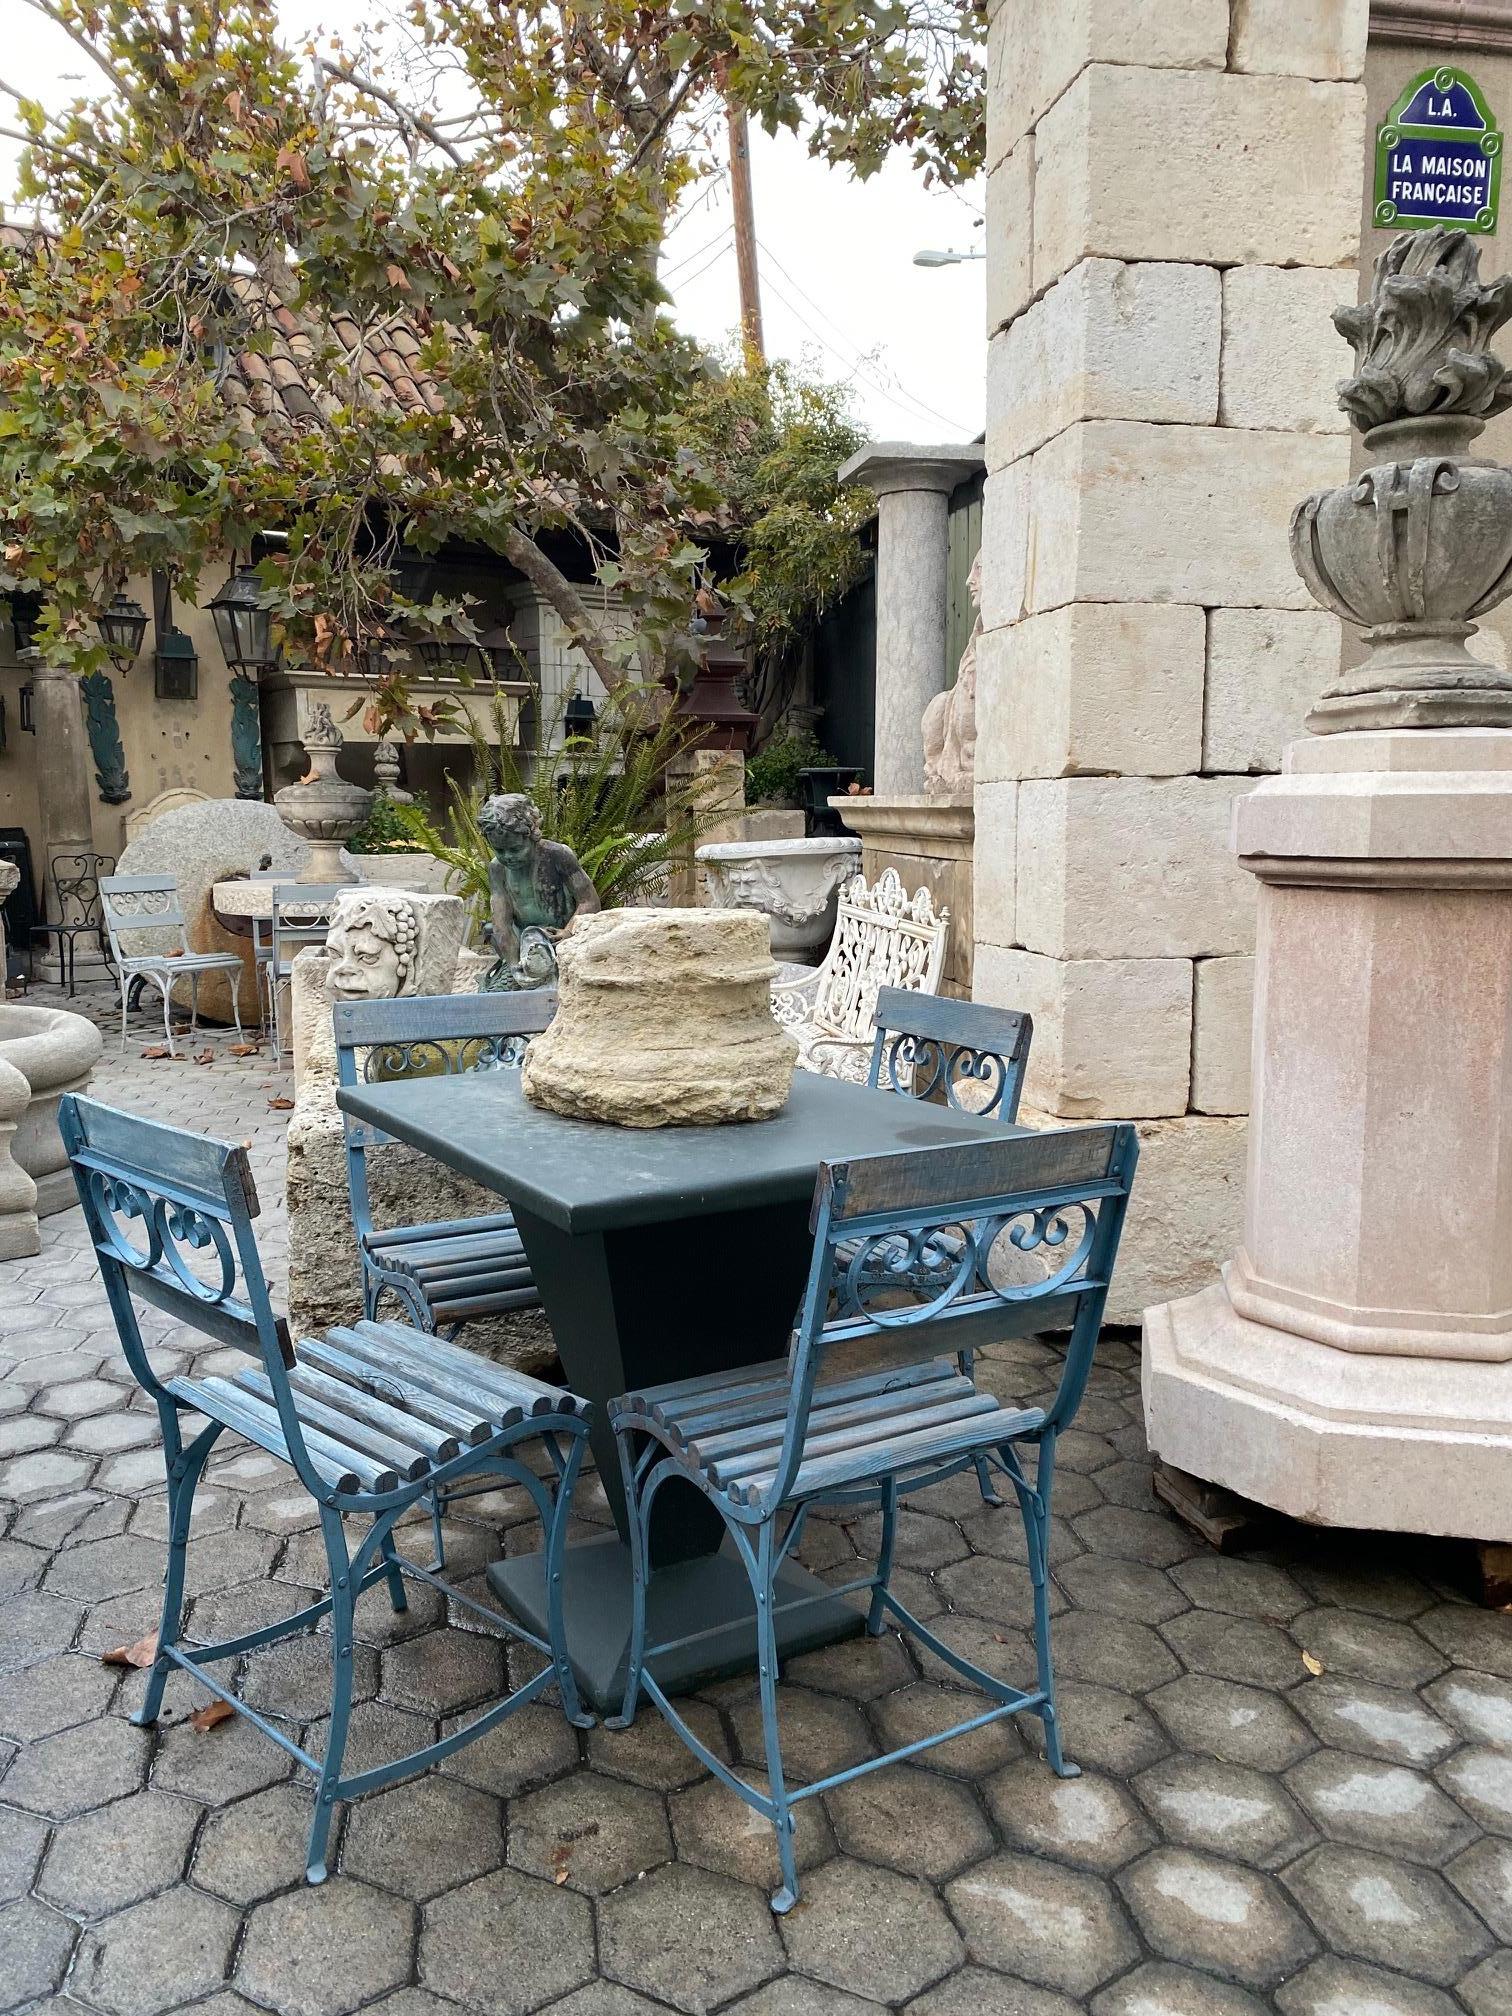 Beautiful 19th century side garden patio Iron Metal and carved wood chairs with old paint furniture, from the Hippodrome horse racing track located in Paris, France. We have Total of 8 in blue color, we have some in the gray and yellow color.